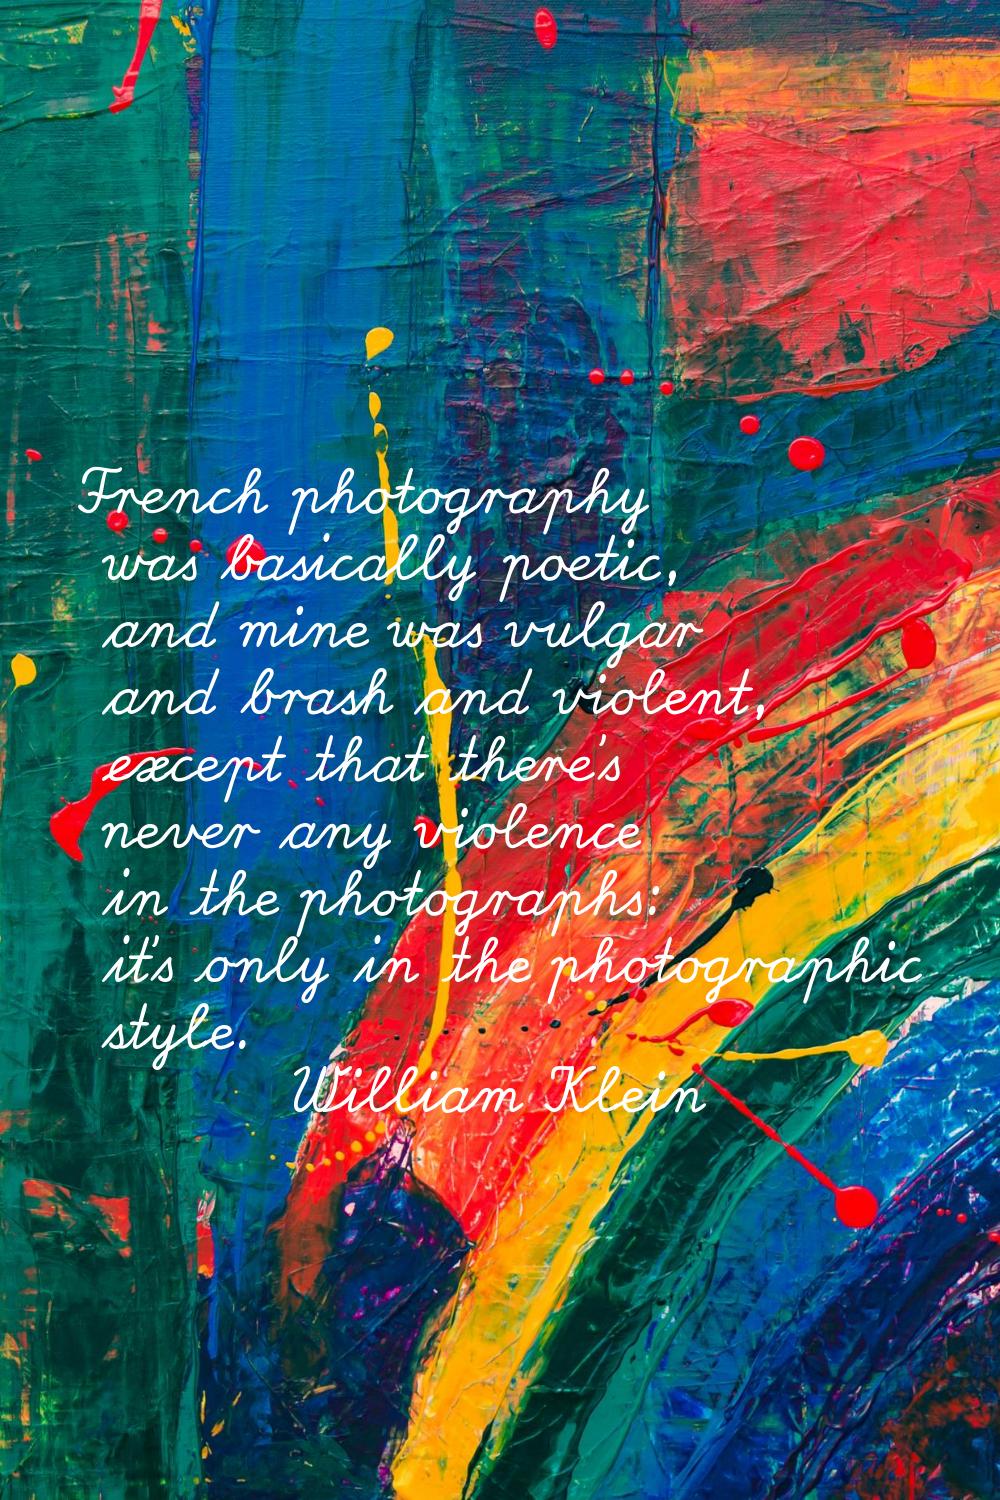 French photography was basically poetic, and mine was vulgar and brash and violent, except that the